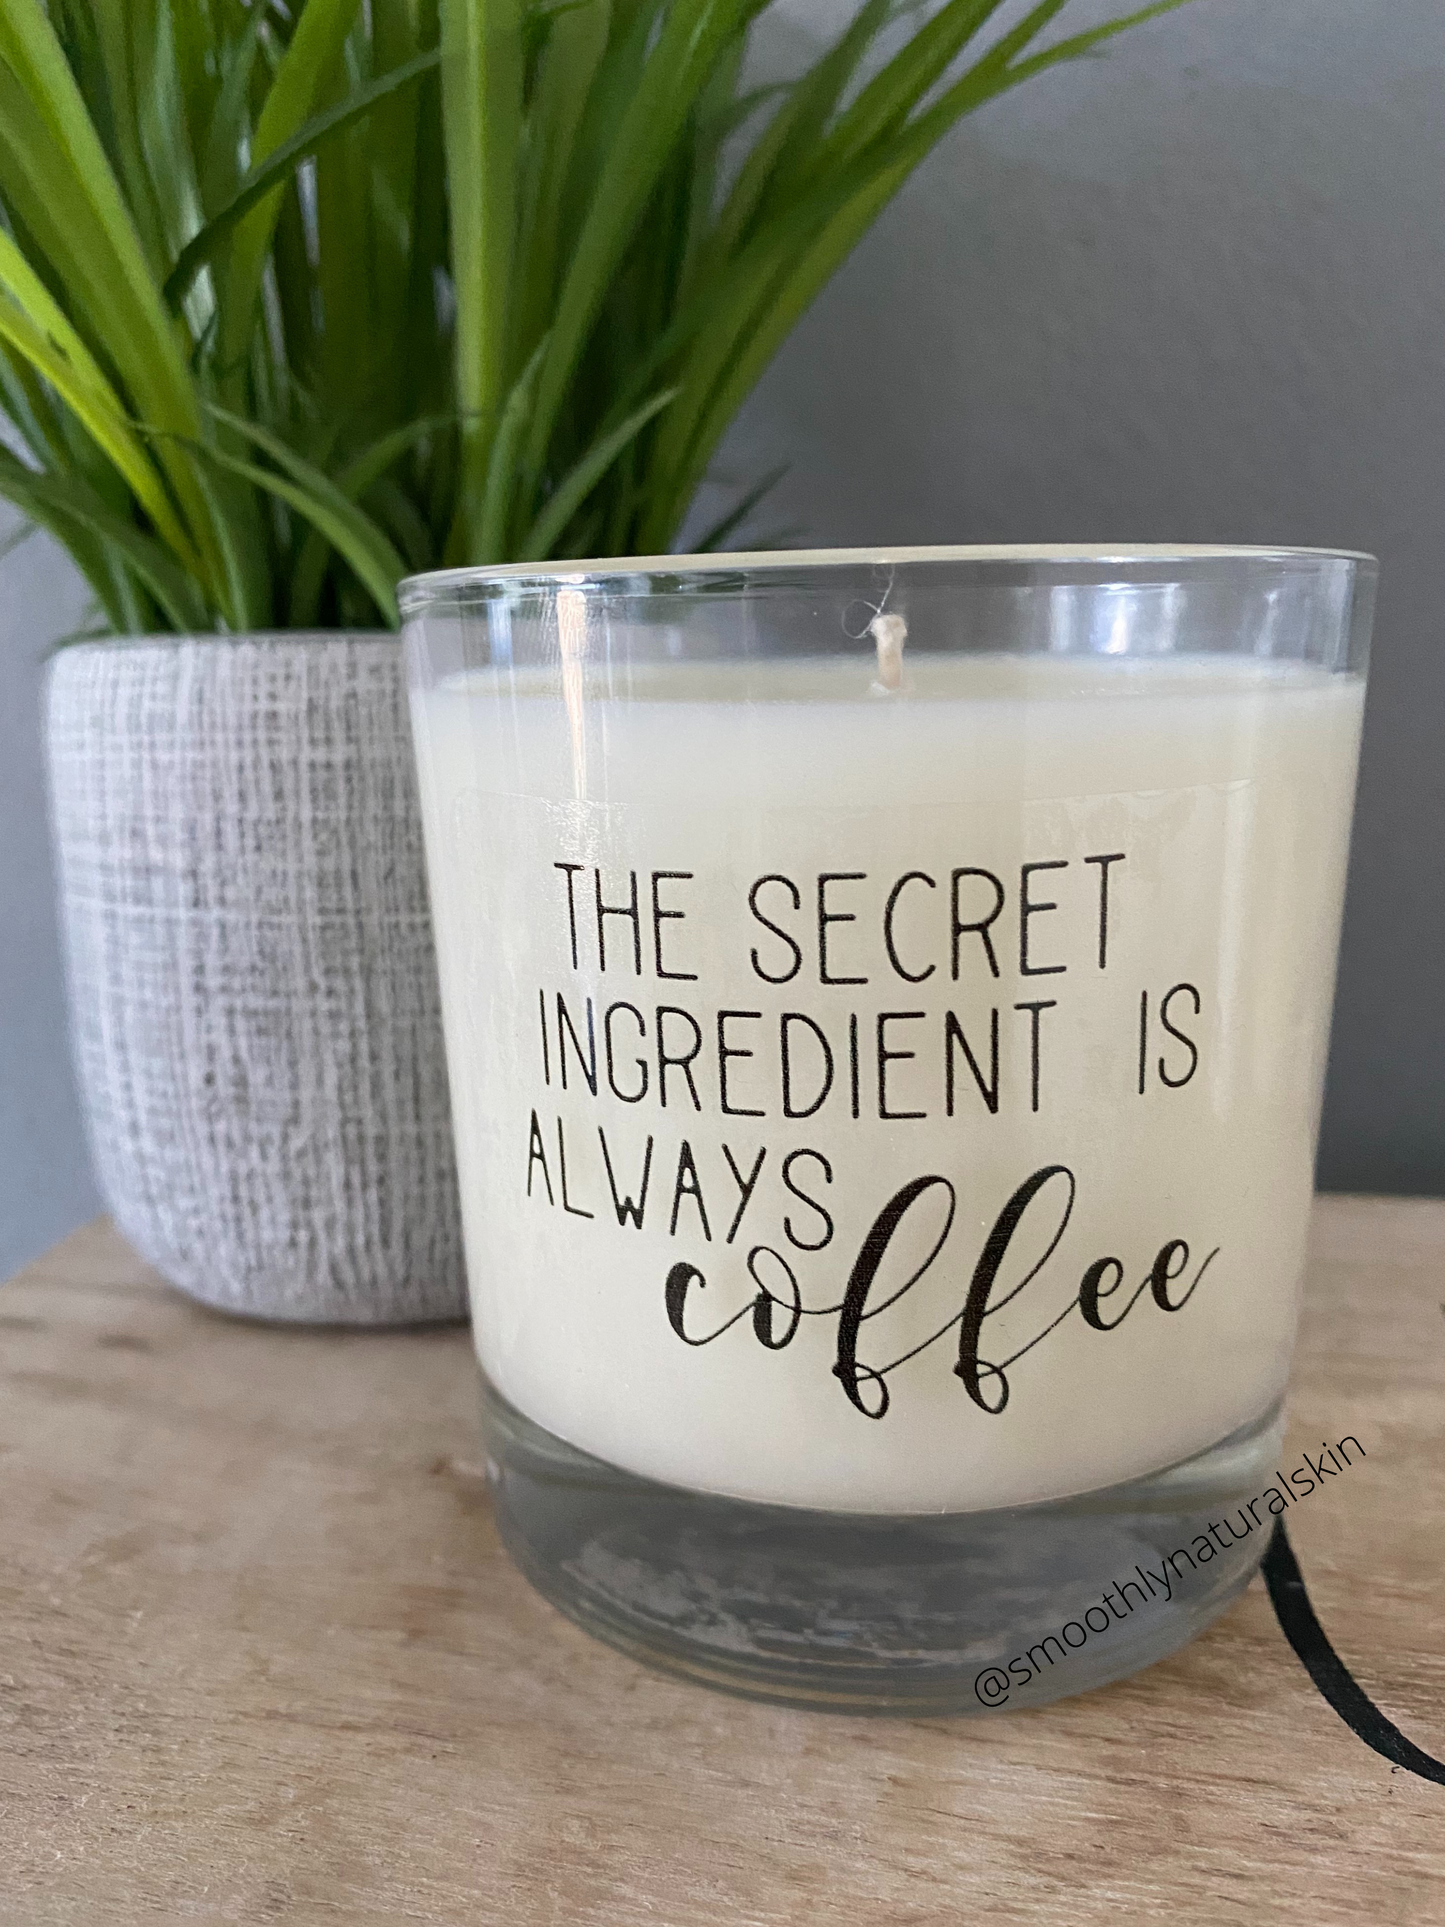 The secret ingredient is always coffee candle, are hand poured in small batches. Smoothly Natural Skin